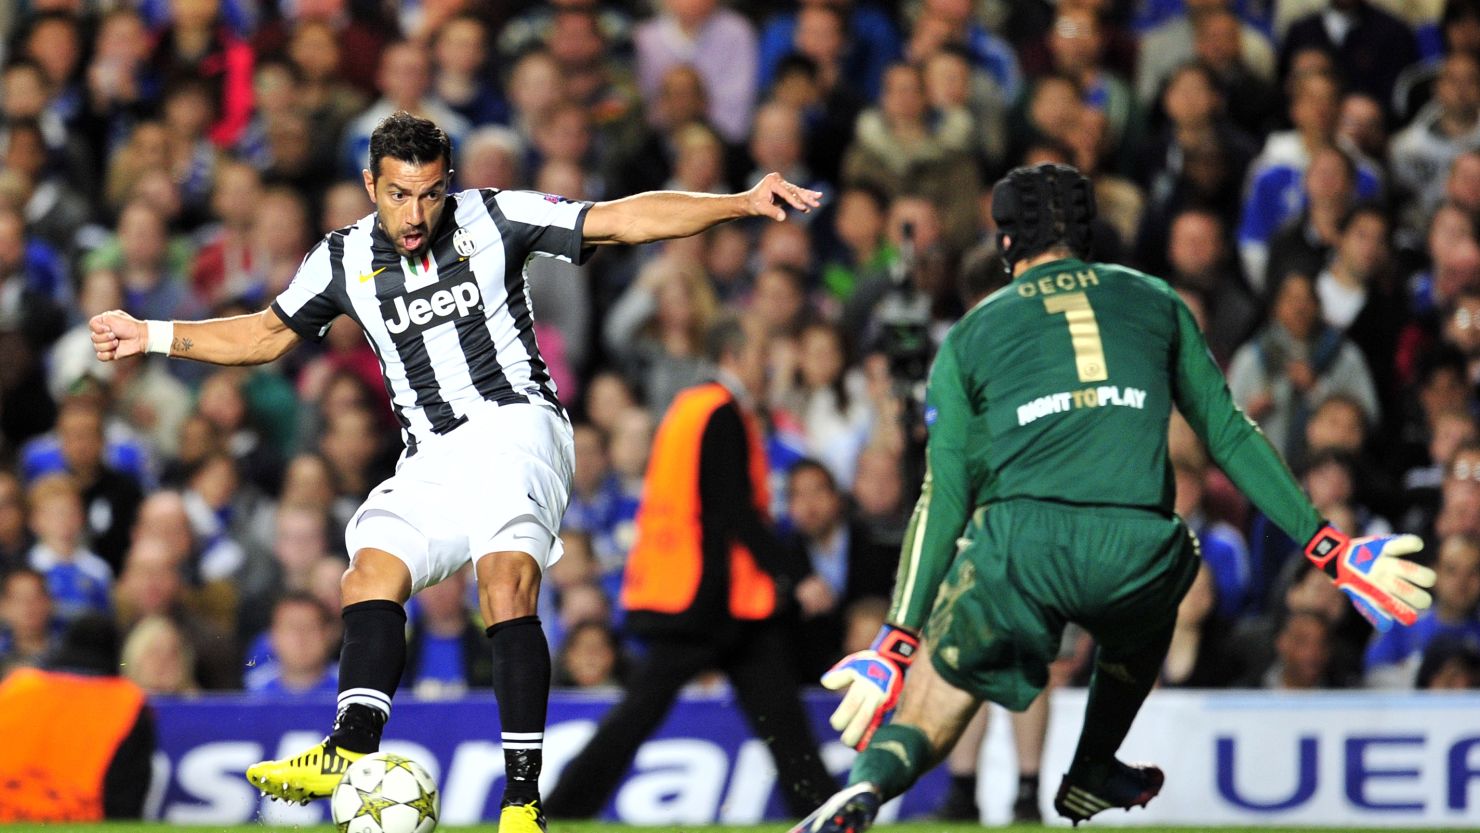 Fabio Quagliarella equalizes for Juventus in their 2-2 draw with Chelsea at Stamford Bridge as the Italian side claimed a point.